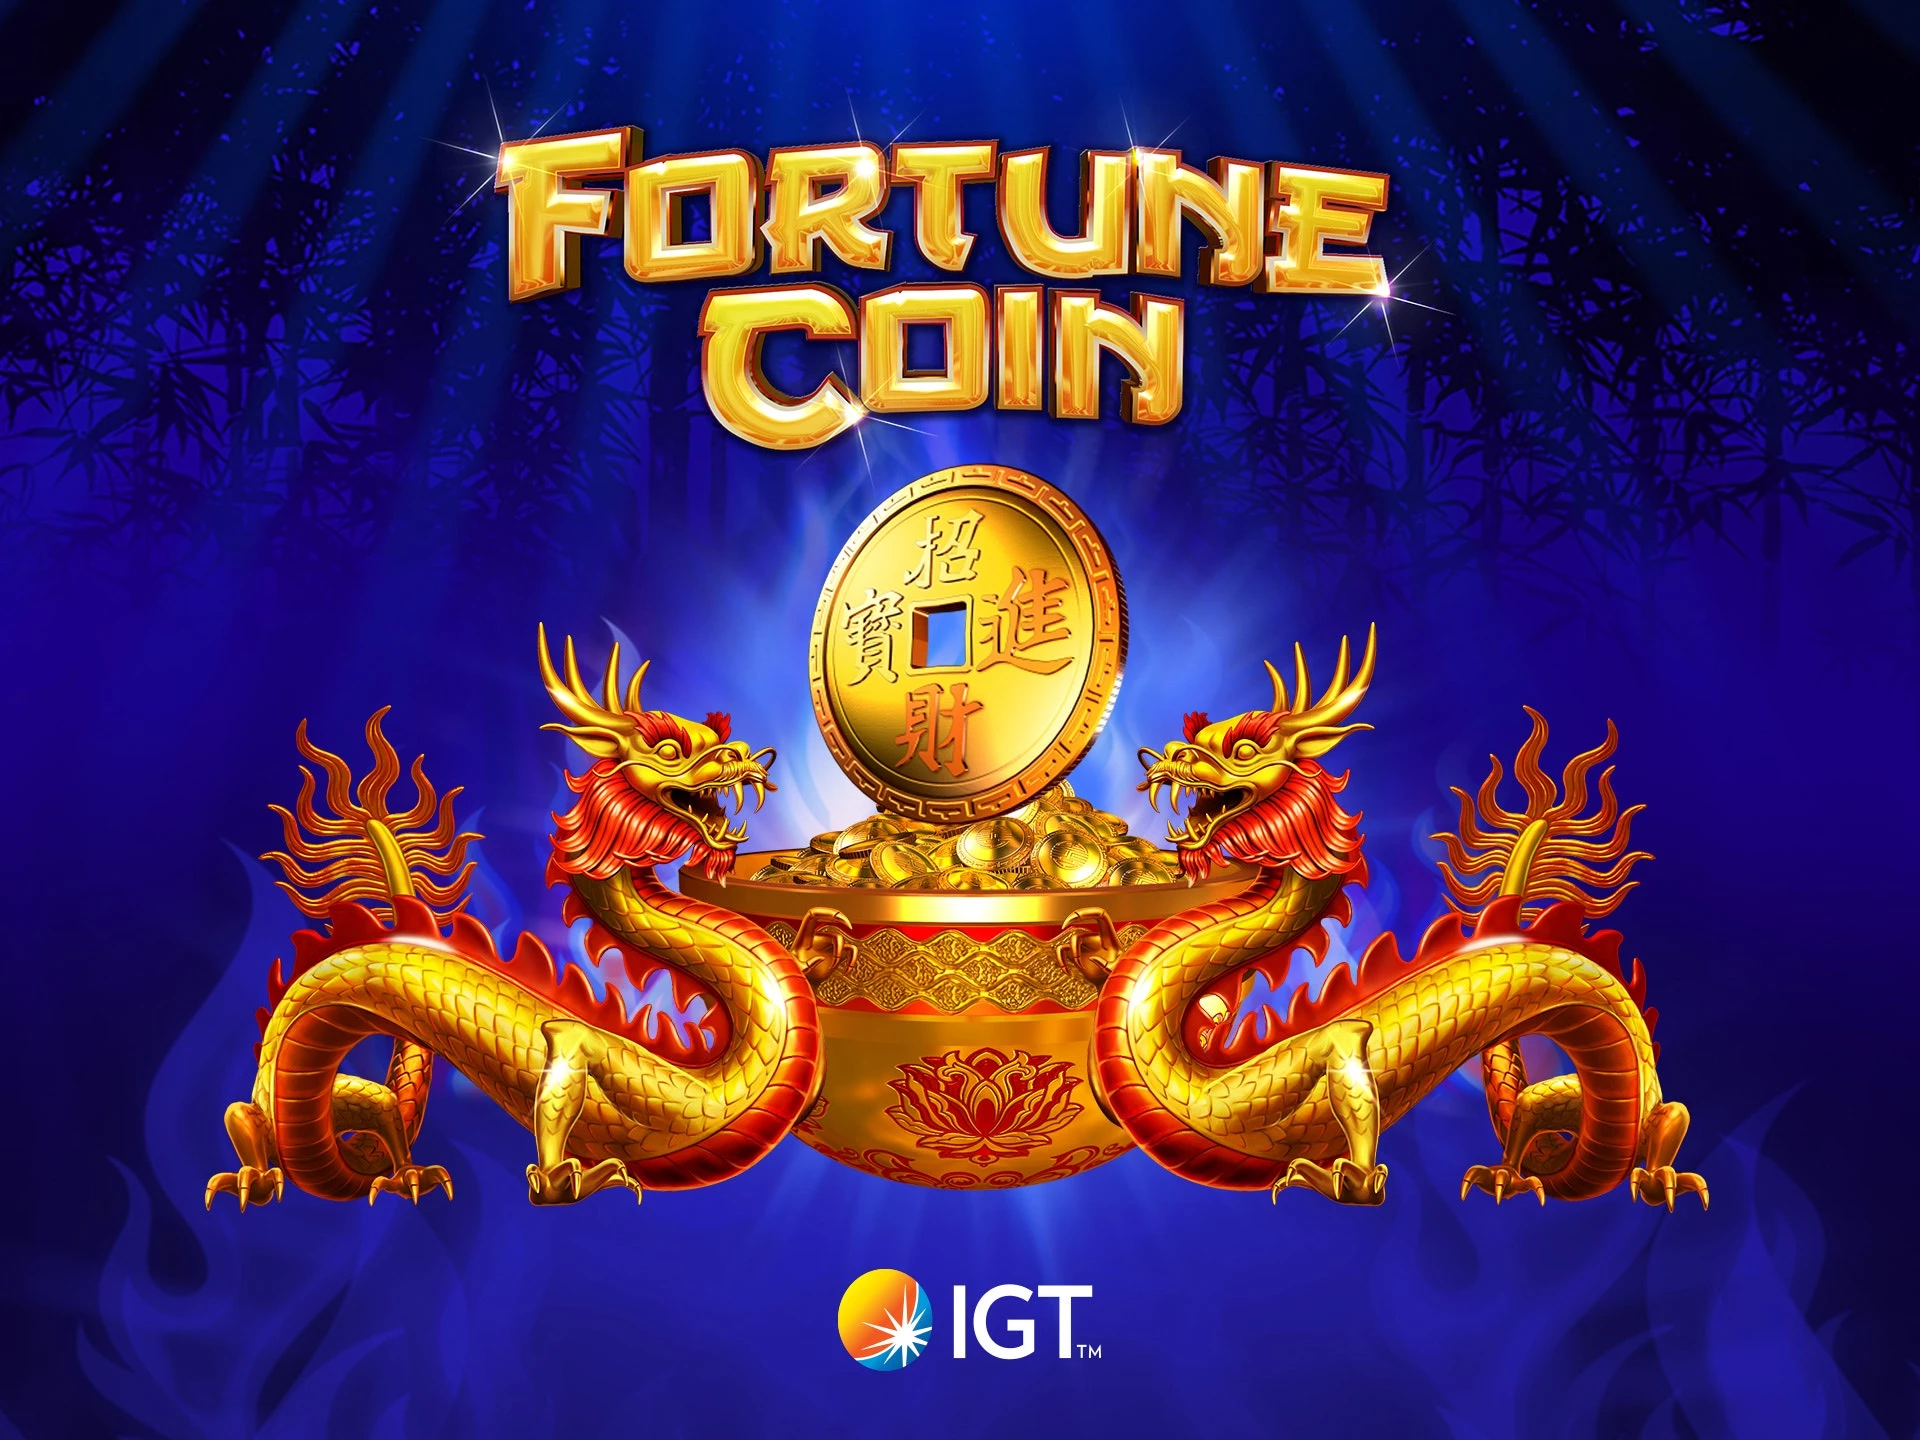 Fortune coin slot